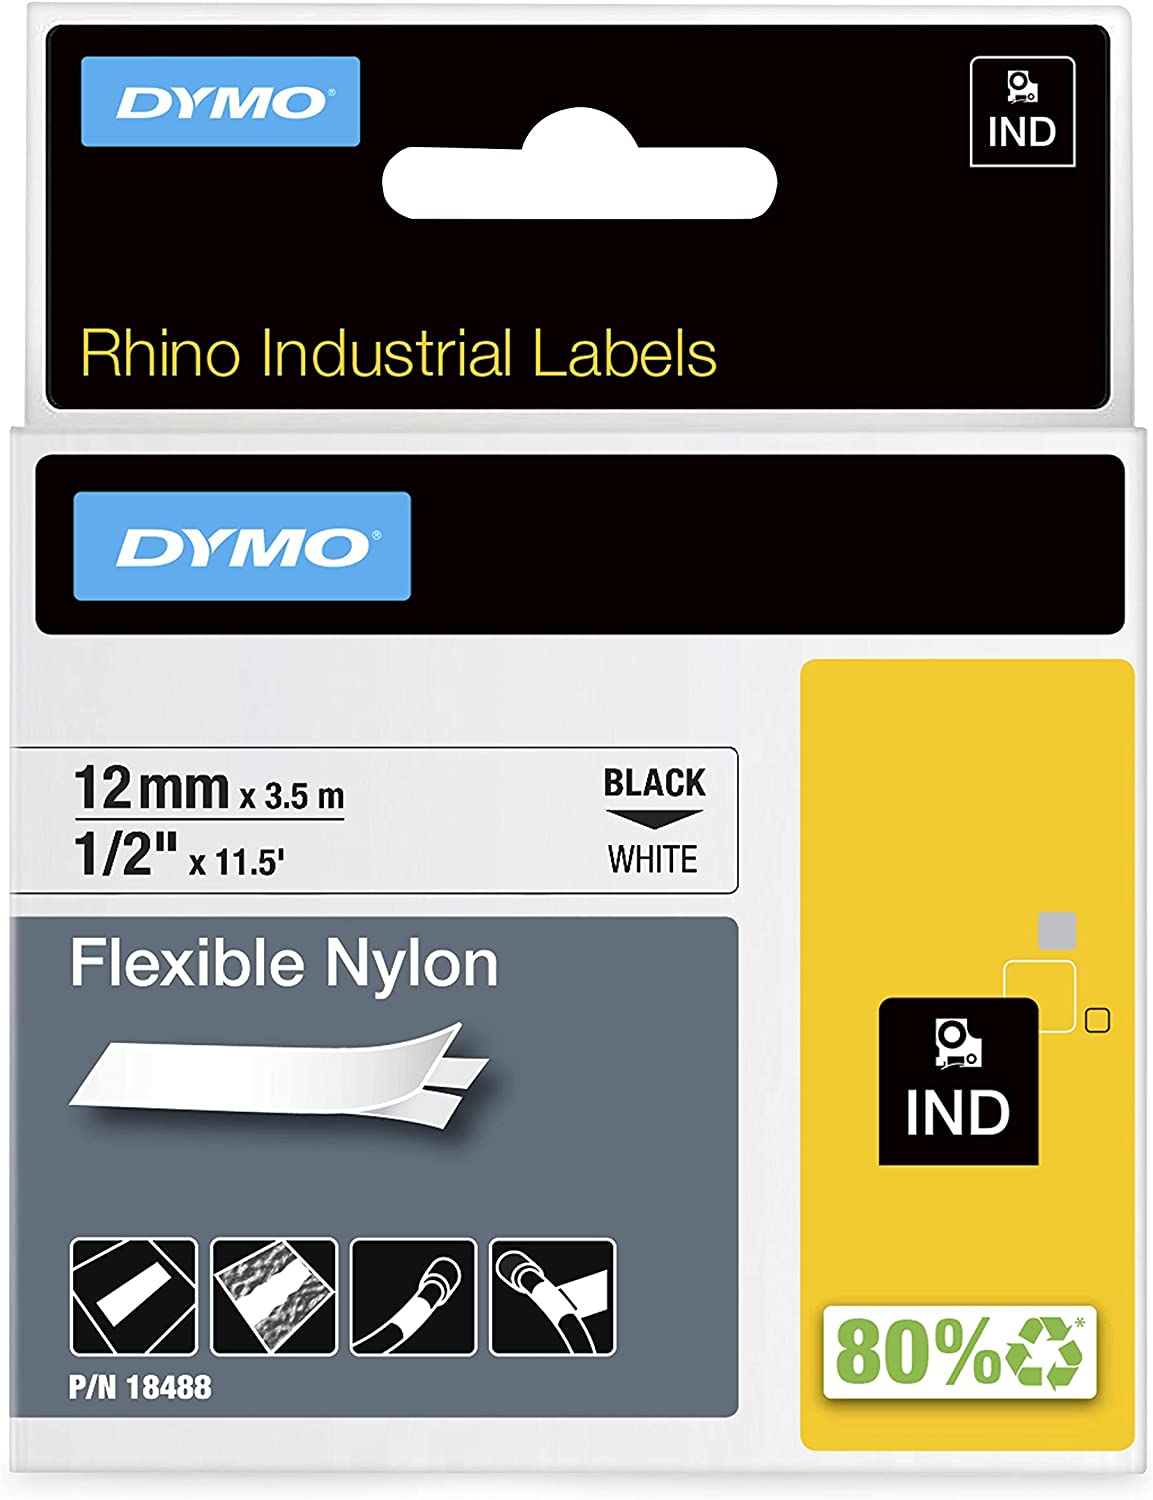 DYMO Authentic Industrial Labels for LabelWriter and Industrial Label Makers, Black on White, 1/2", 1 Roll (18488), DYMO Authentic Black on White 1/2" (12MM)